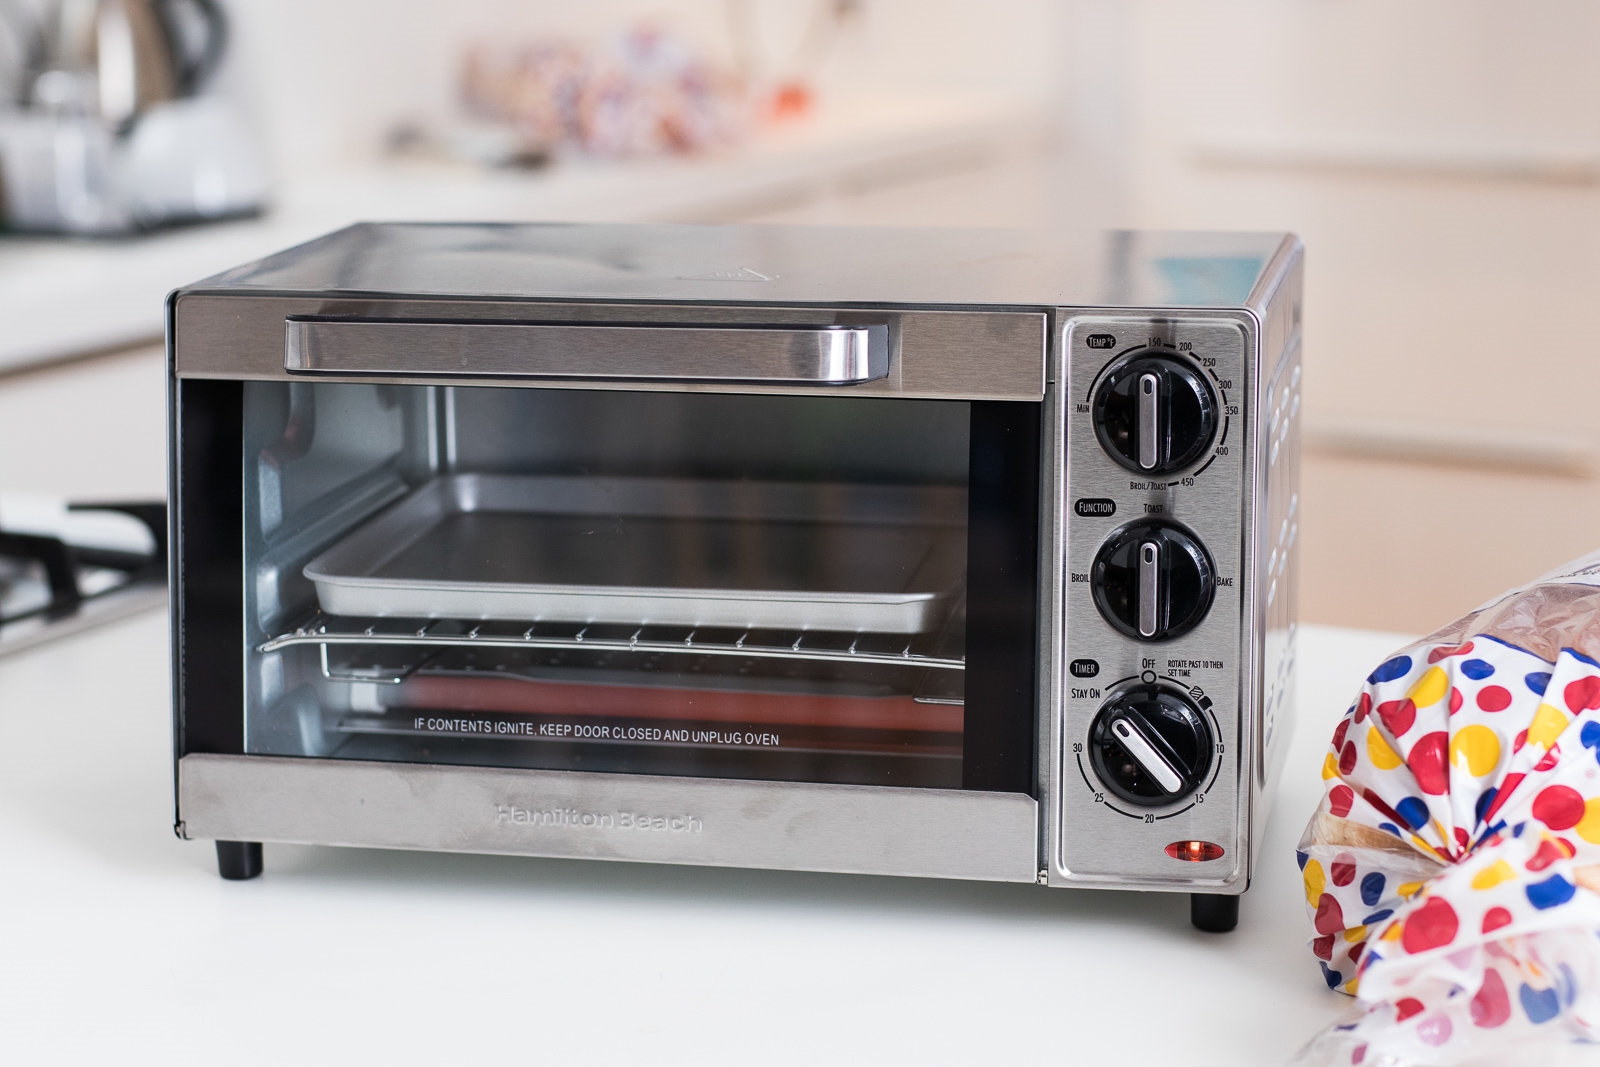 The best toaster oven | DeviceDaily.com